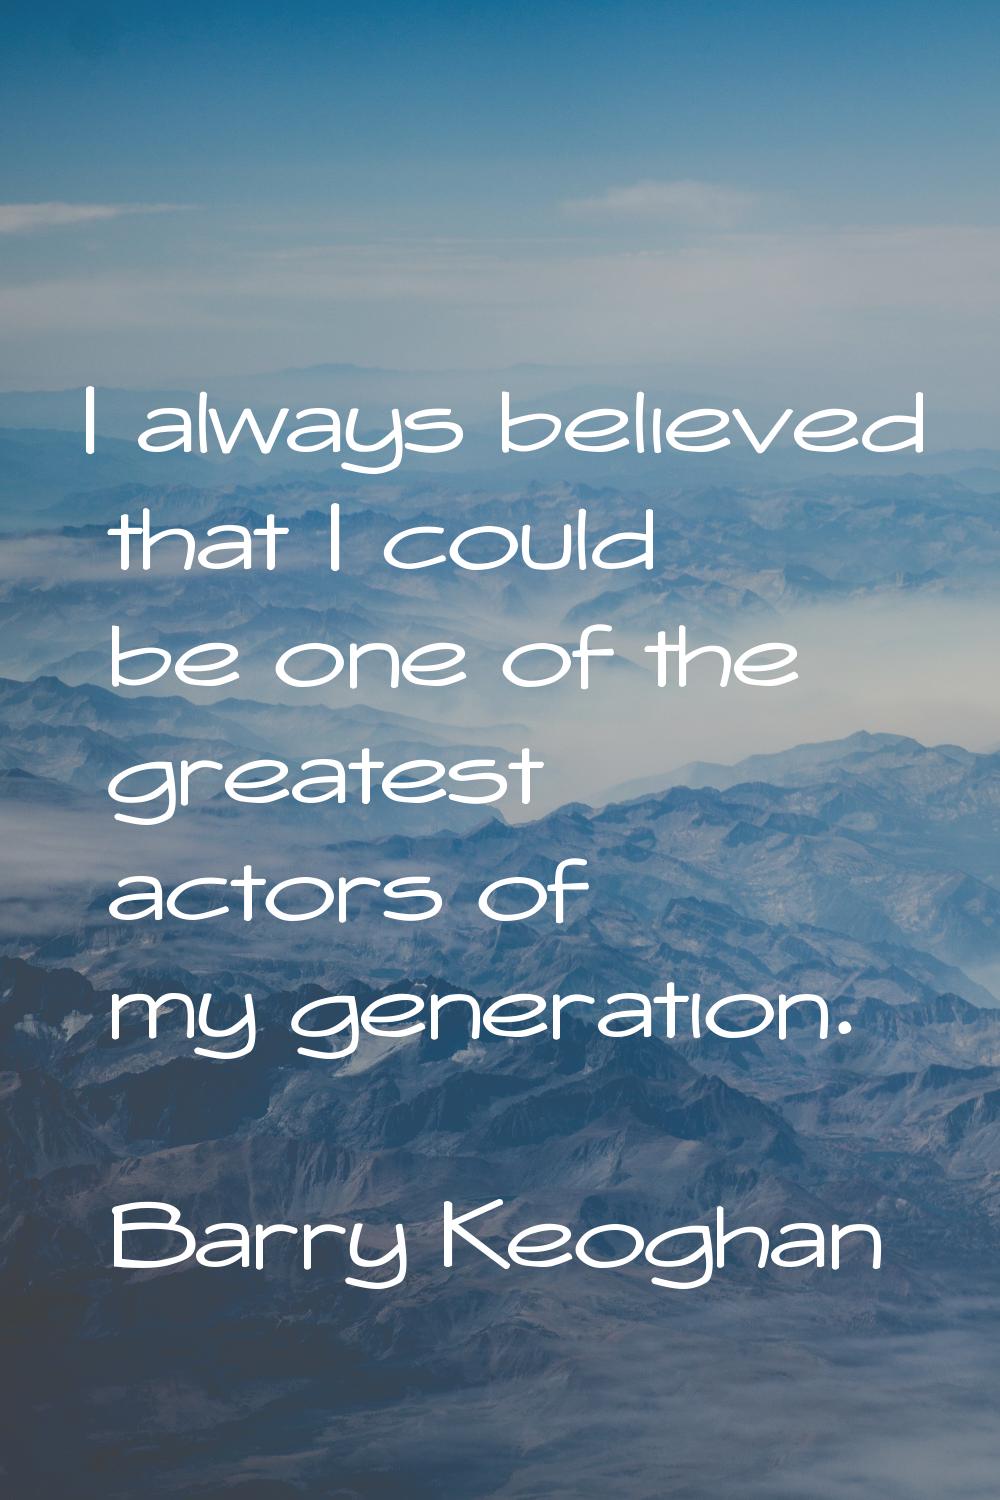 I always believed that I could be one of the greatest actors of my generation.